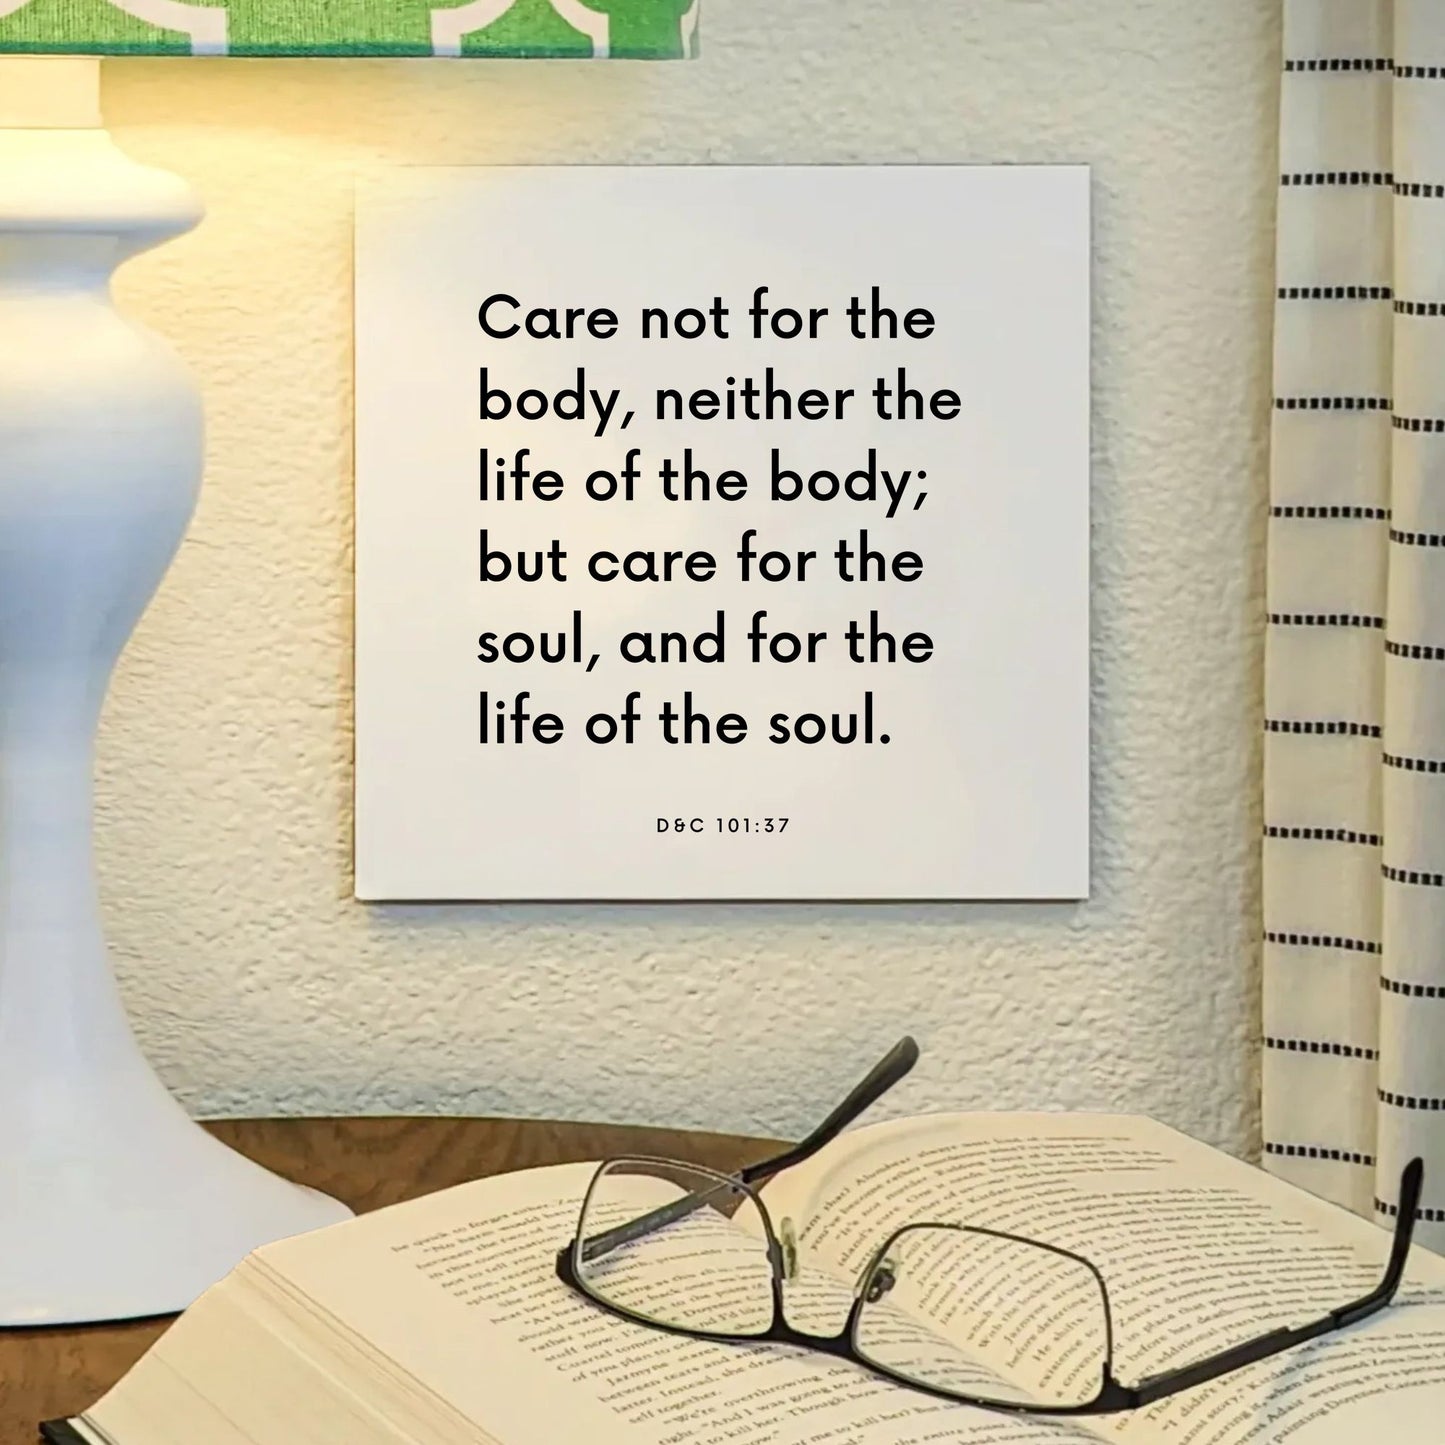 Lamp mouting of the scripture tile for D&C 101:37 - "Care not for the body, neither the life of the body"